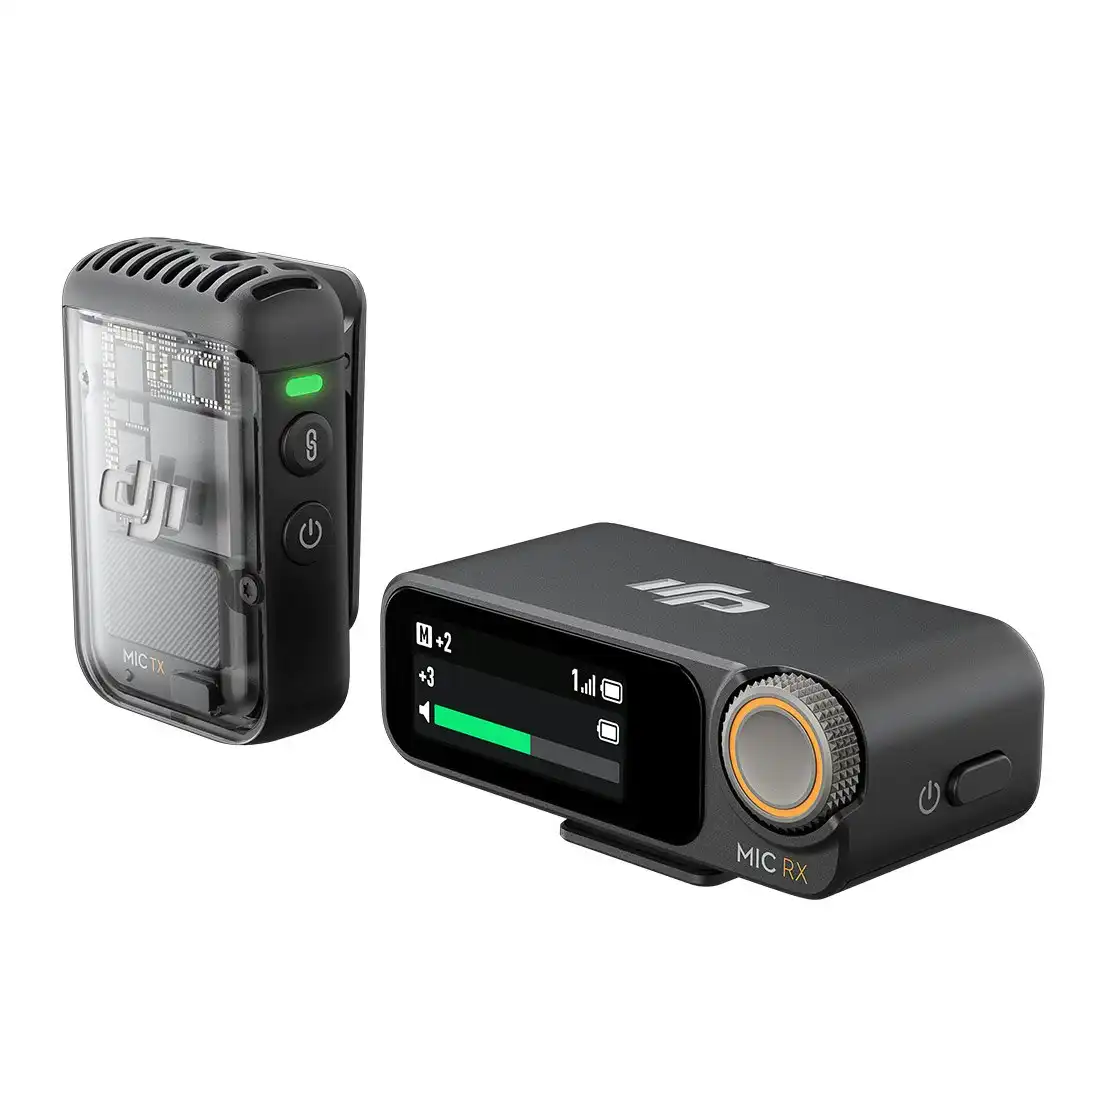 Dji Mic 2 (1 Transmitter + 1 Receiver) Wireless Microphone (For Android, iPhone, PC, Camera)